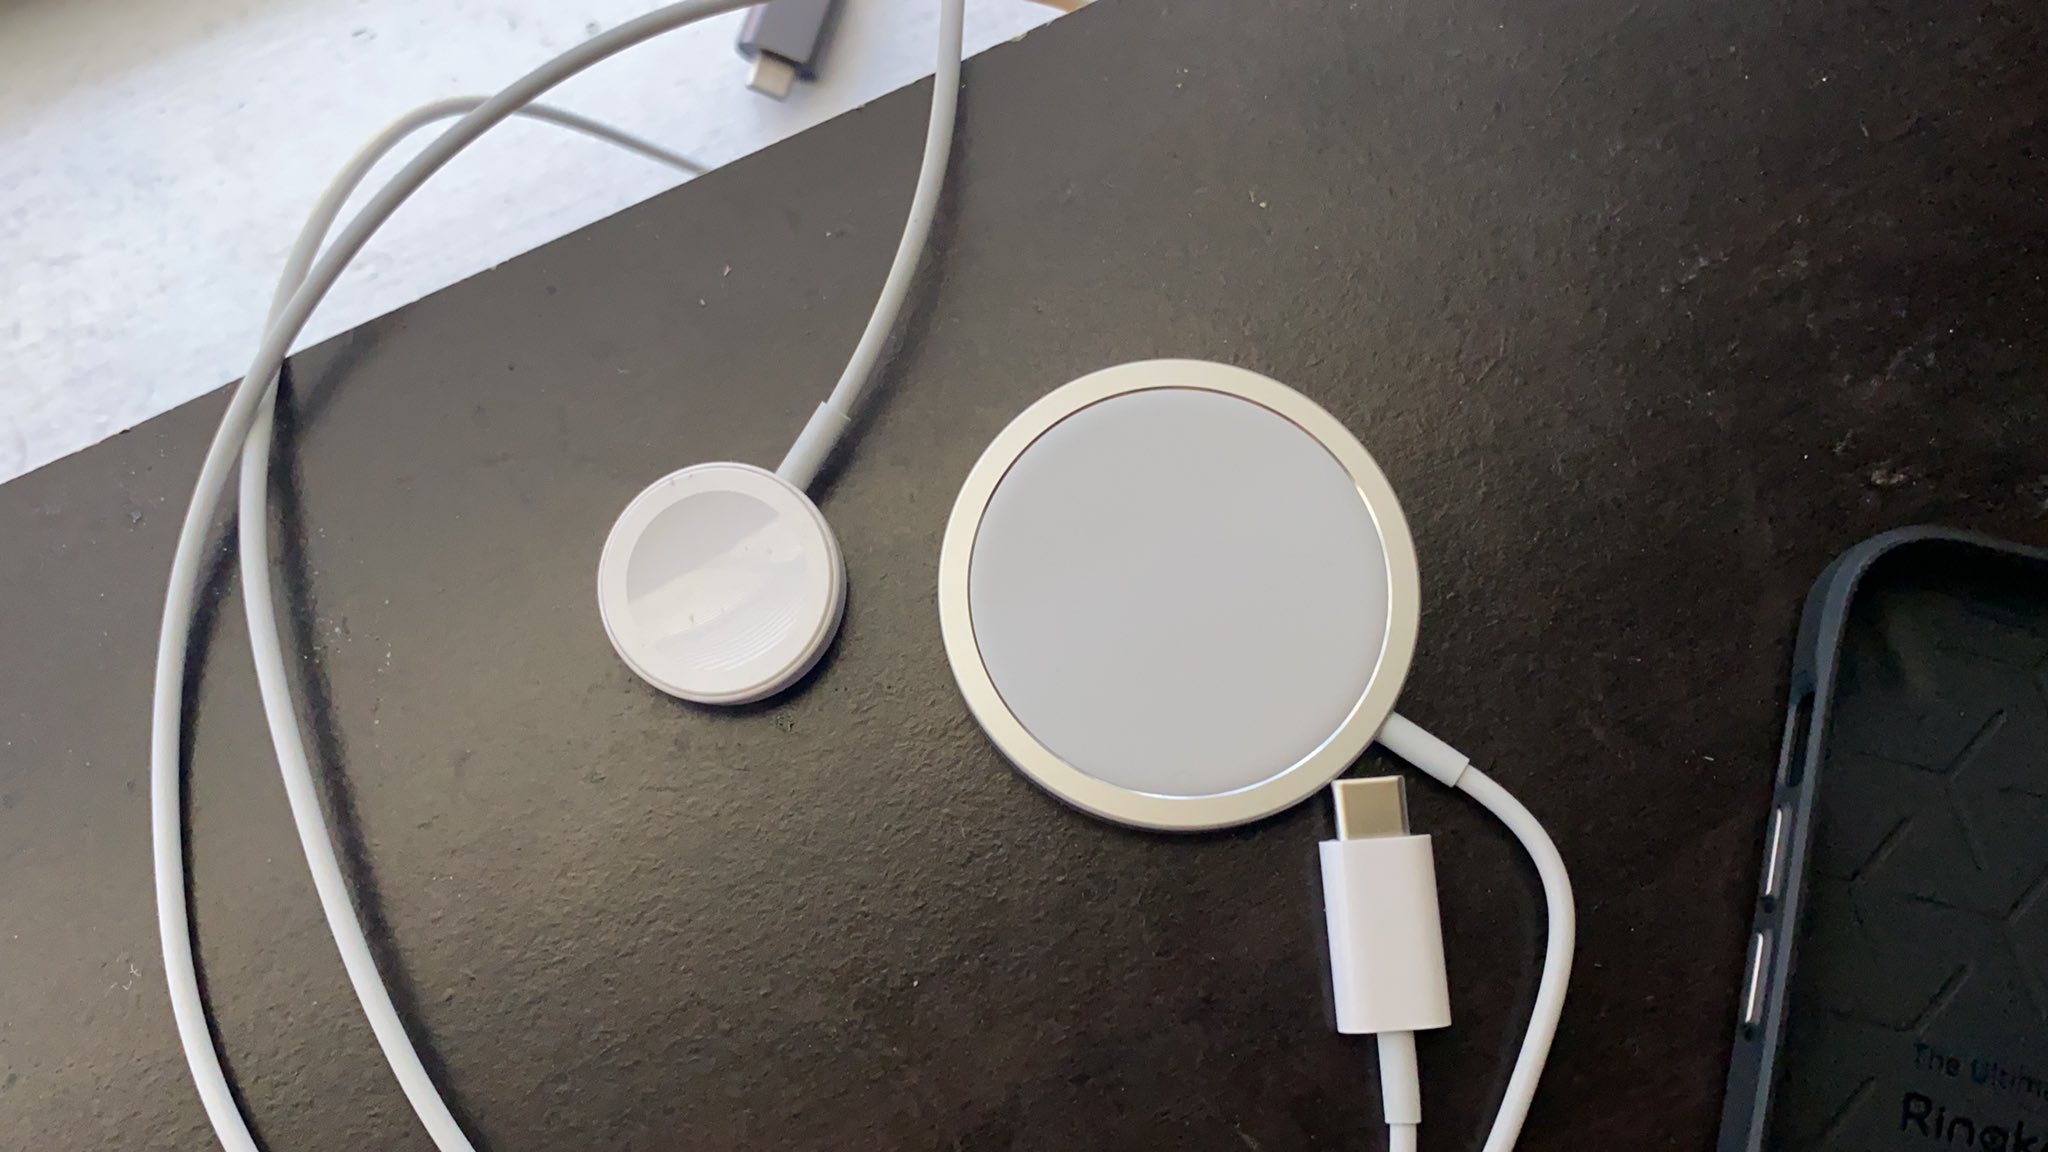 https://9to5mac.com/wp-content/uploads/sites/6/2020/10/MagSafe-Charger.jpeg?quality=82&strip=all